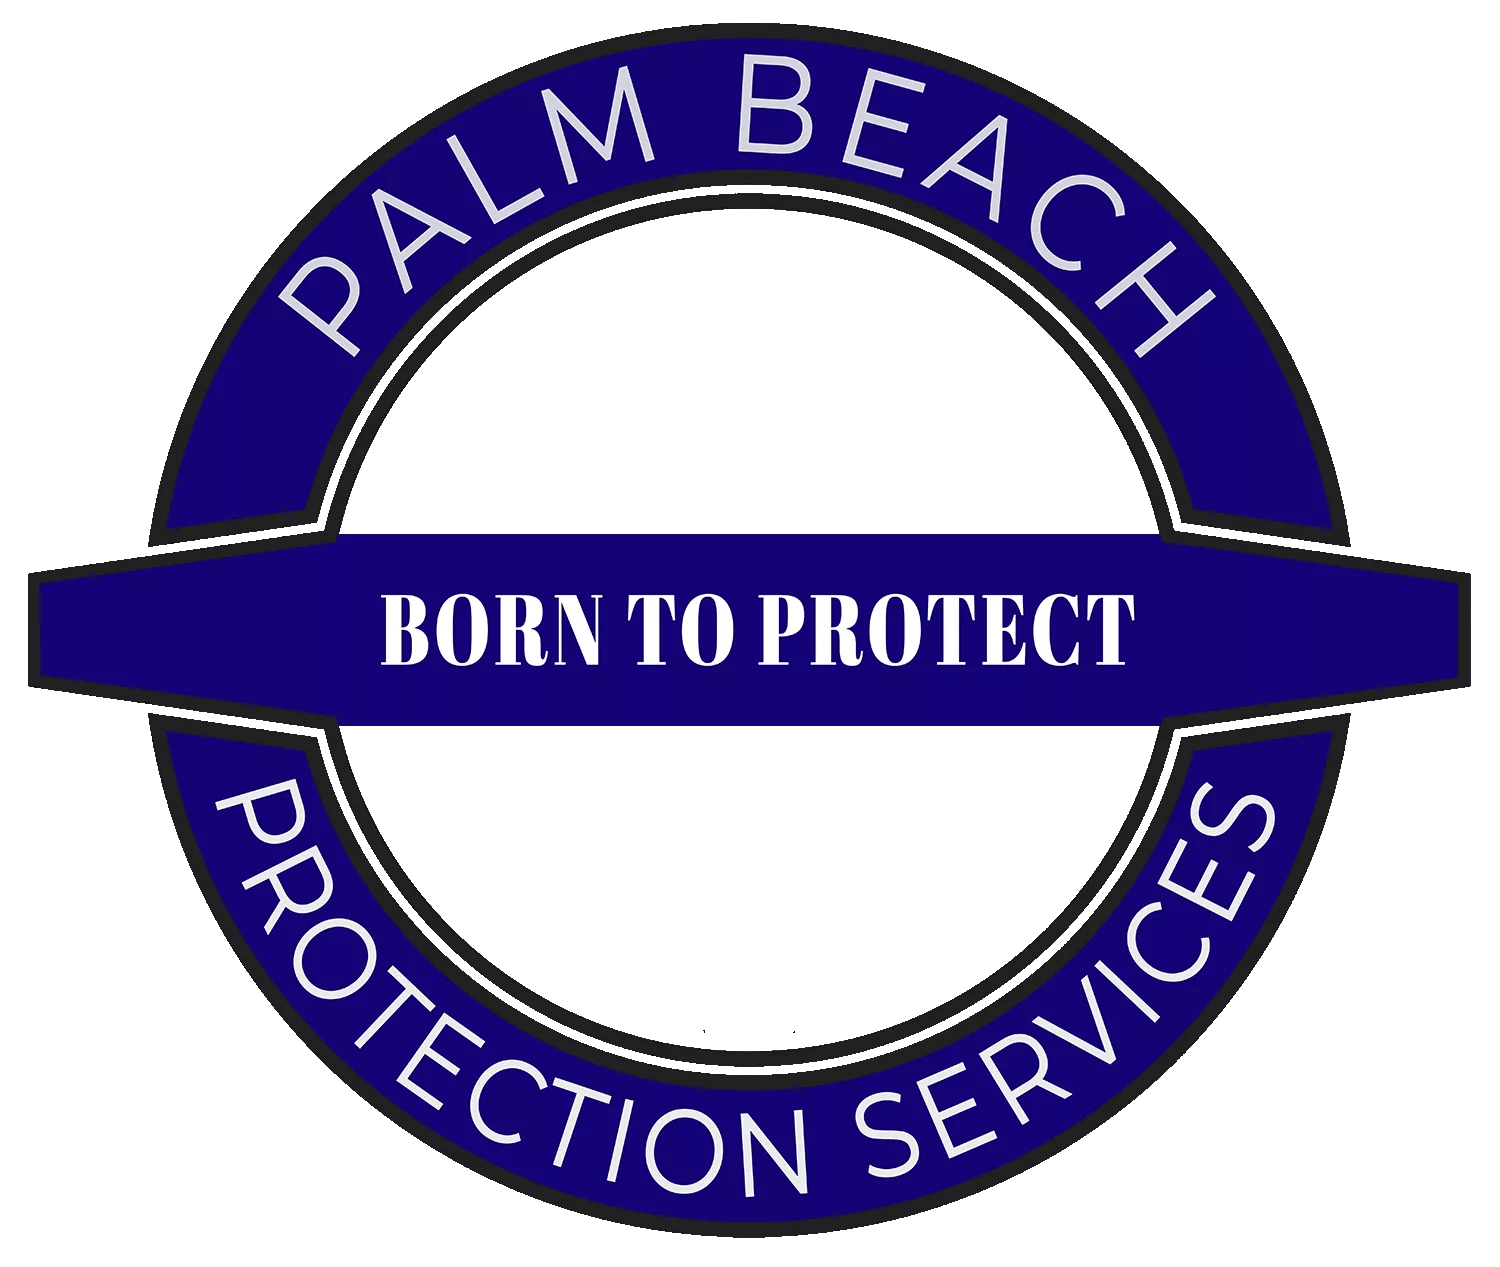 Palm Beach Protection Services